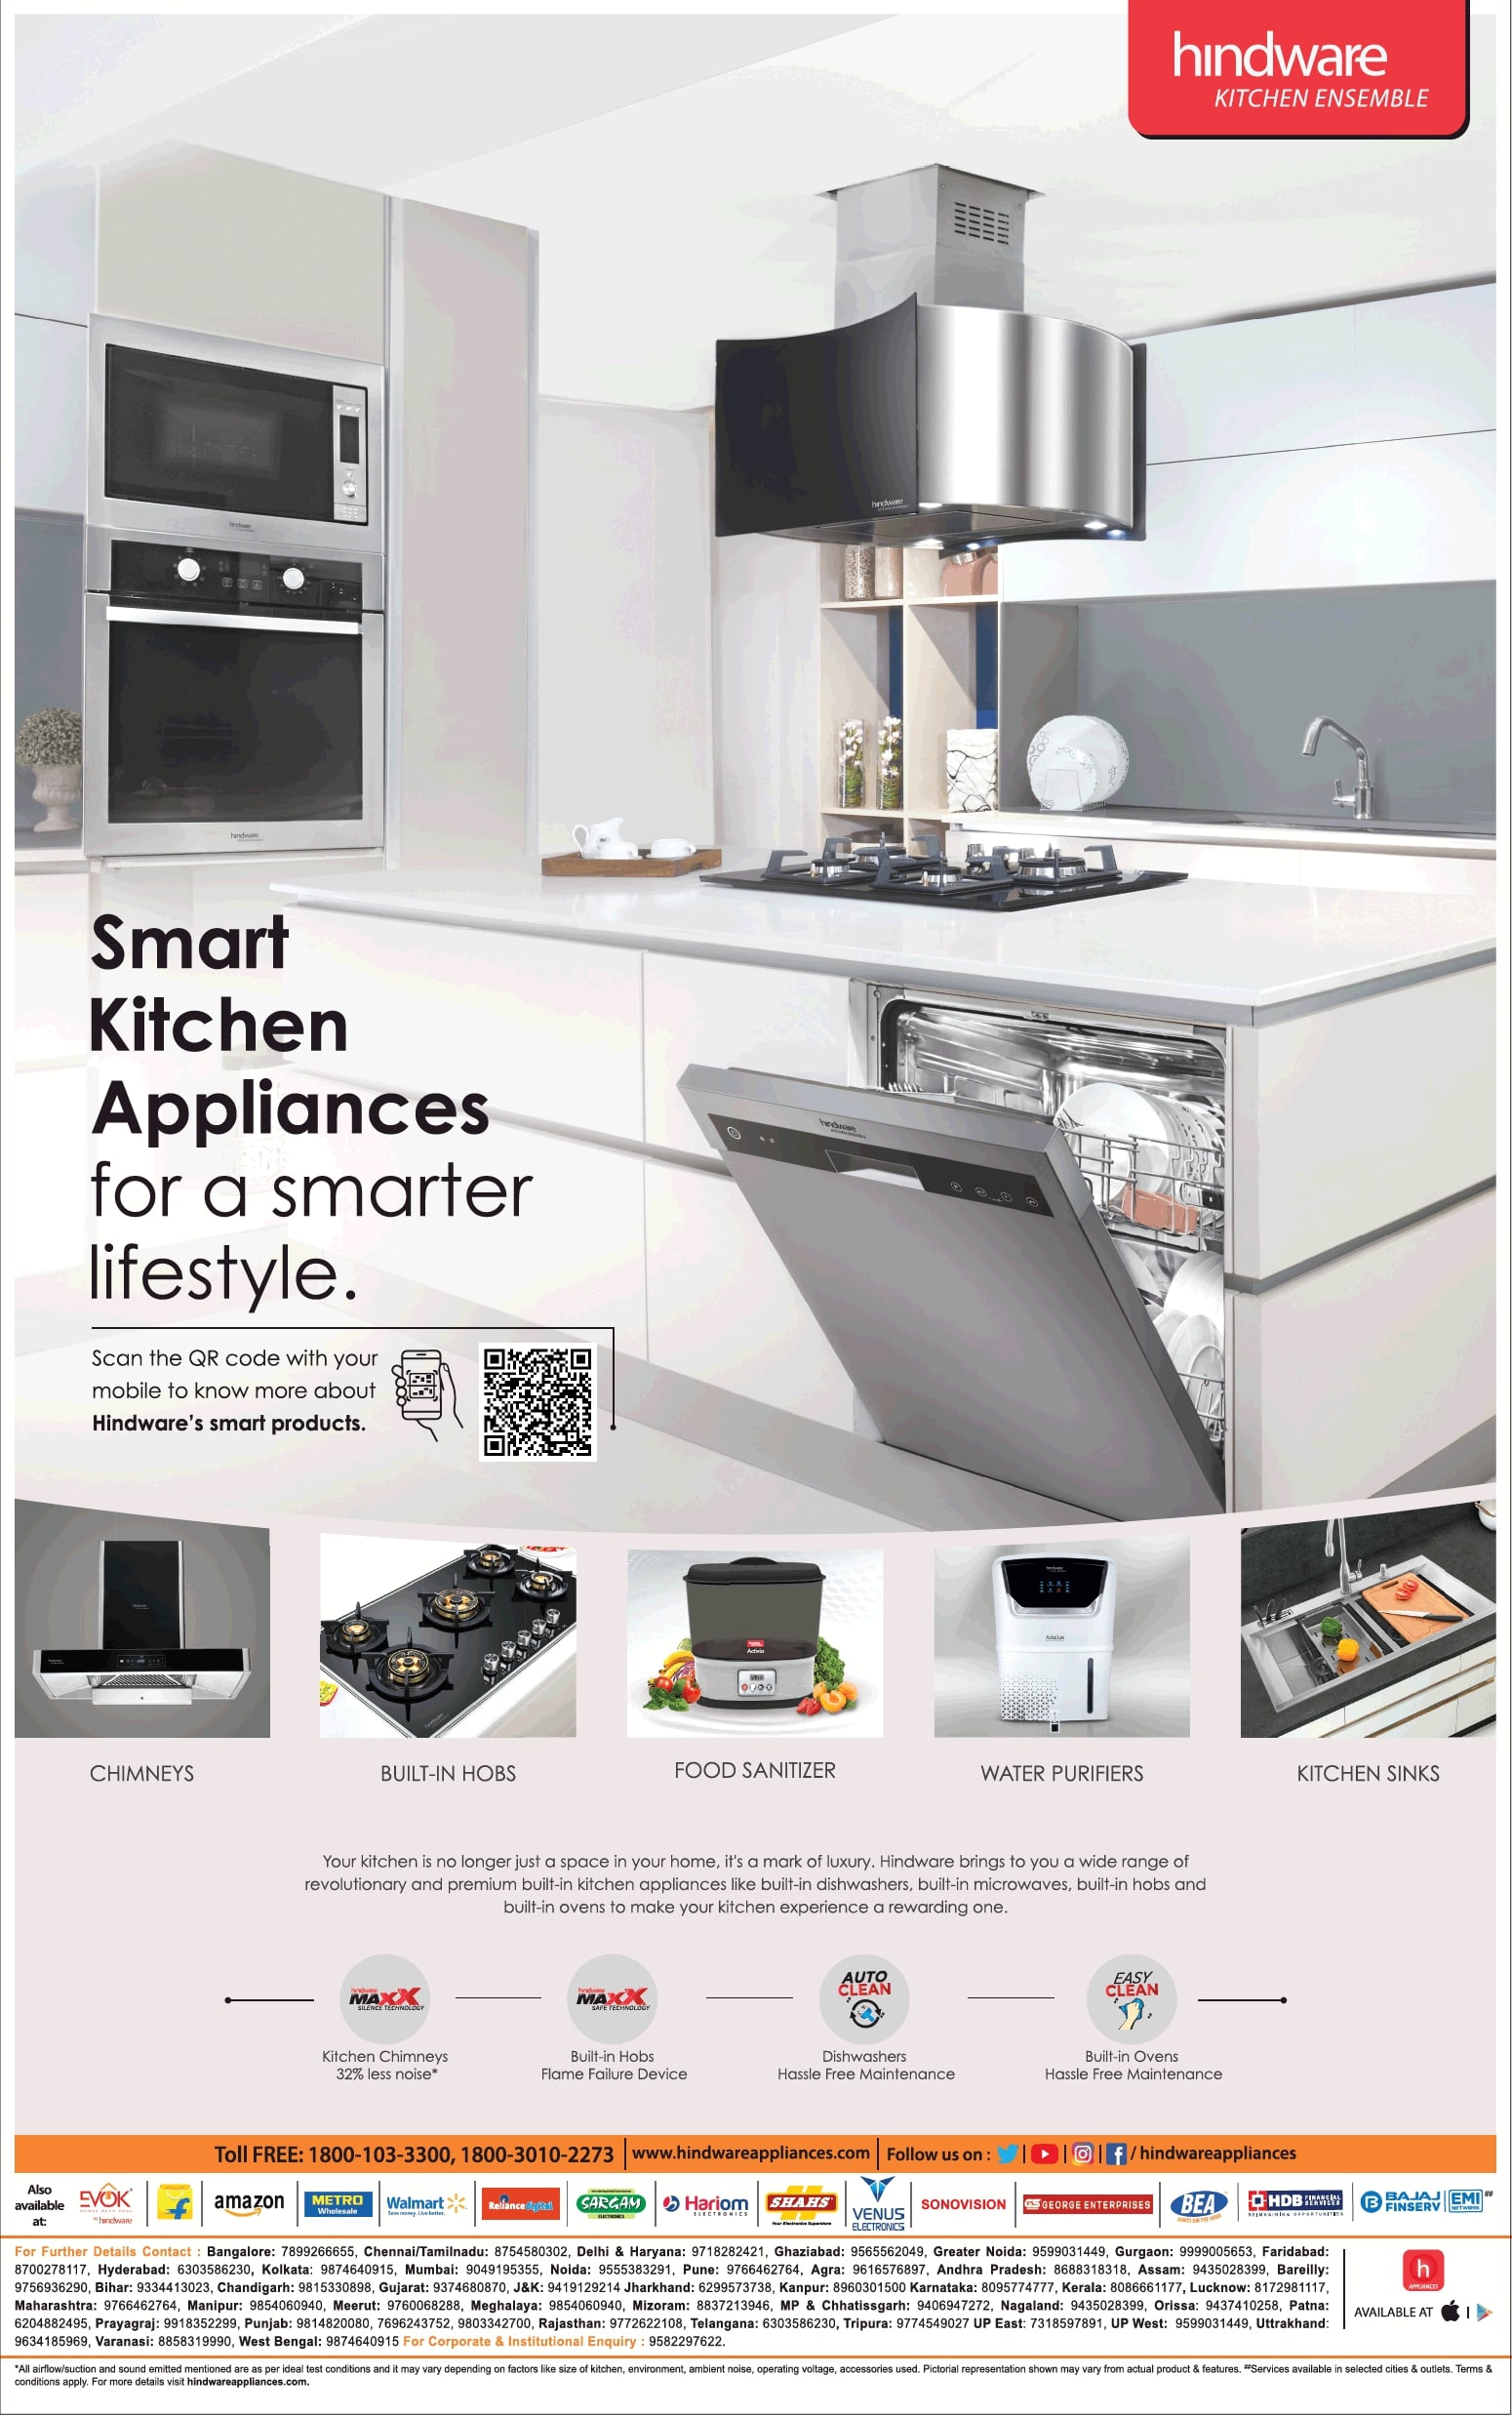 hindware-smart-kitchen-appliances-for-a-smarter-lifestyle-ad-times-of-india-mumbai-23-01-2021